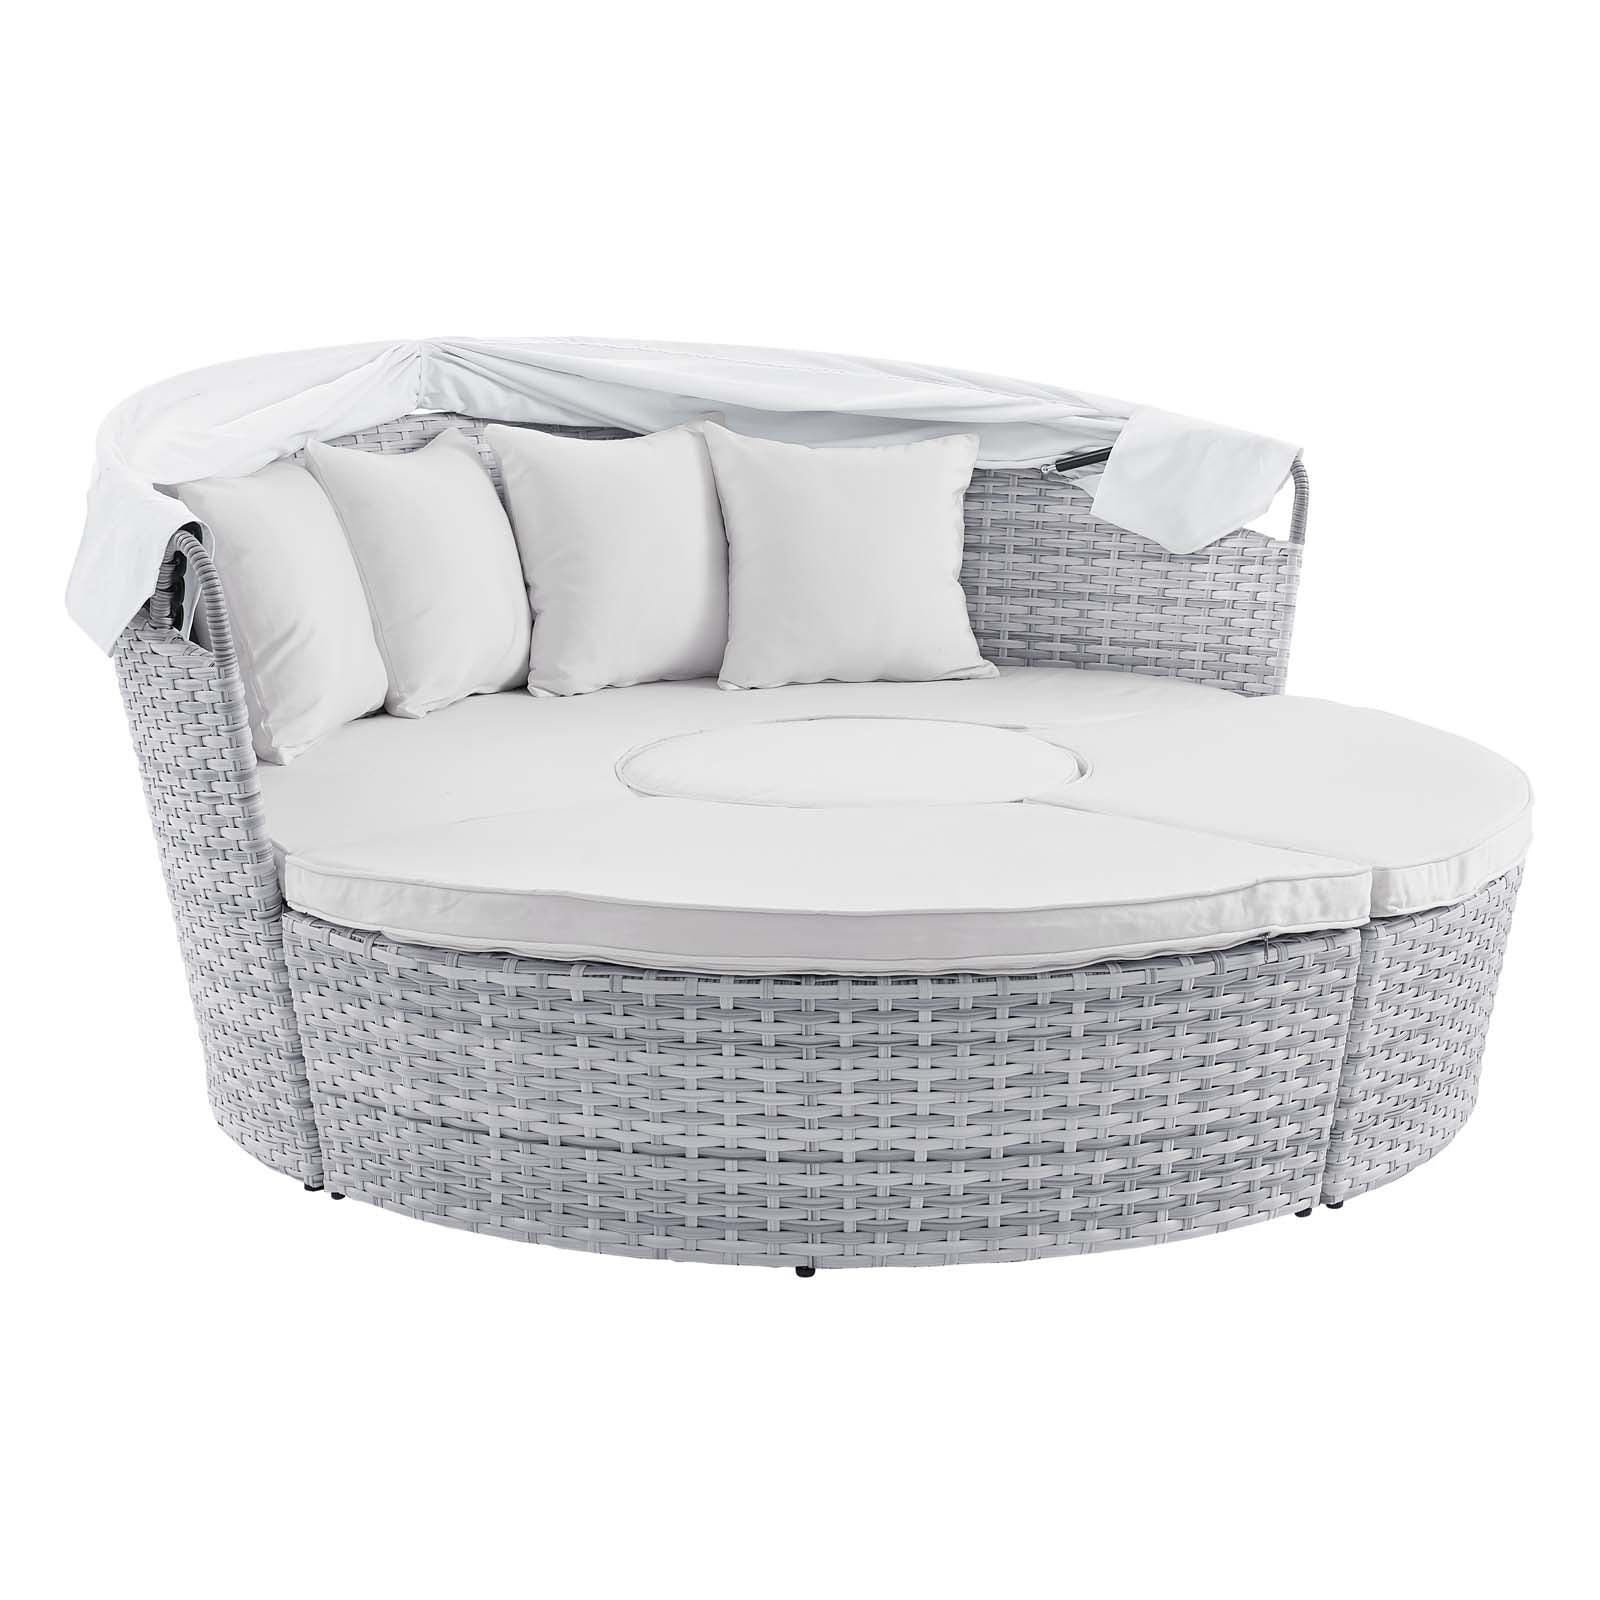 Modway Patio Daybeds - Scottsdale Canopy Outdoor Patio Daybed Light Gray White